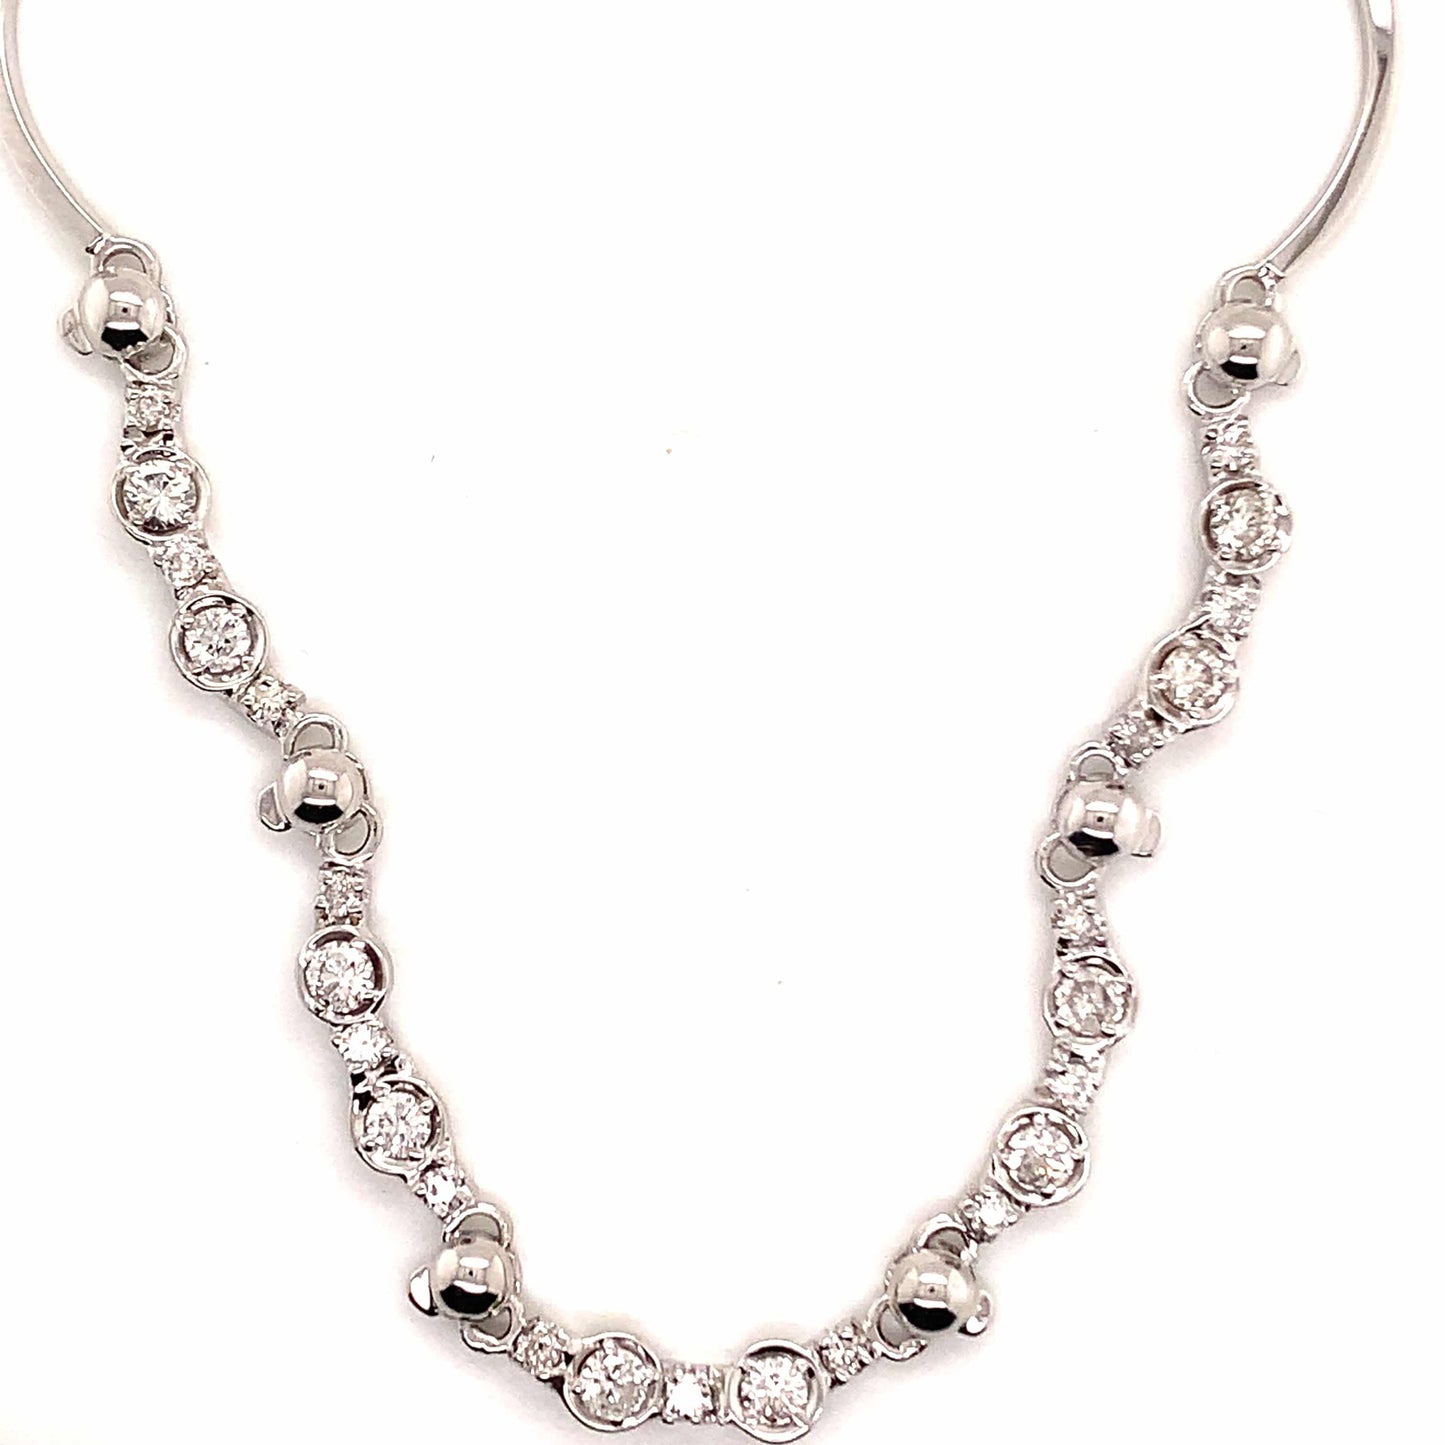 Diamond 14k Gold Necklace 1.5 CT 16.50 inch Certified $4,950 822590 - Certified Estate Jewelry